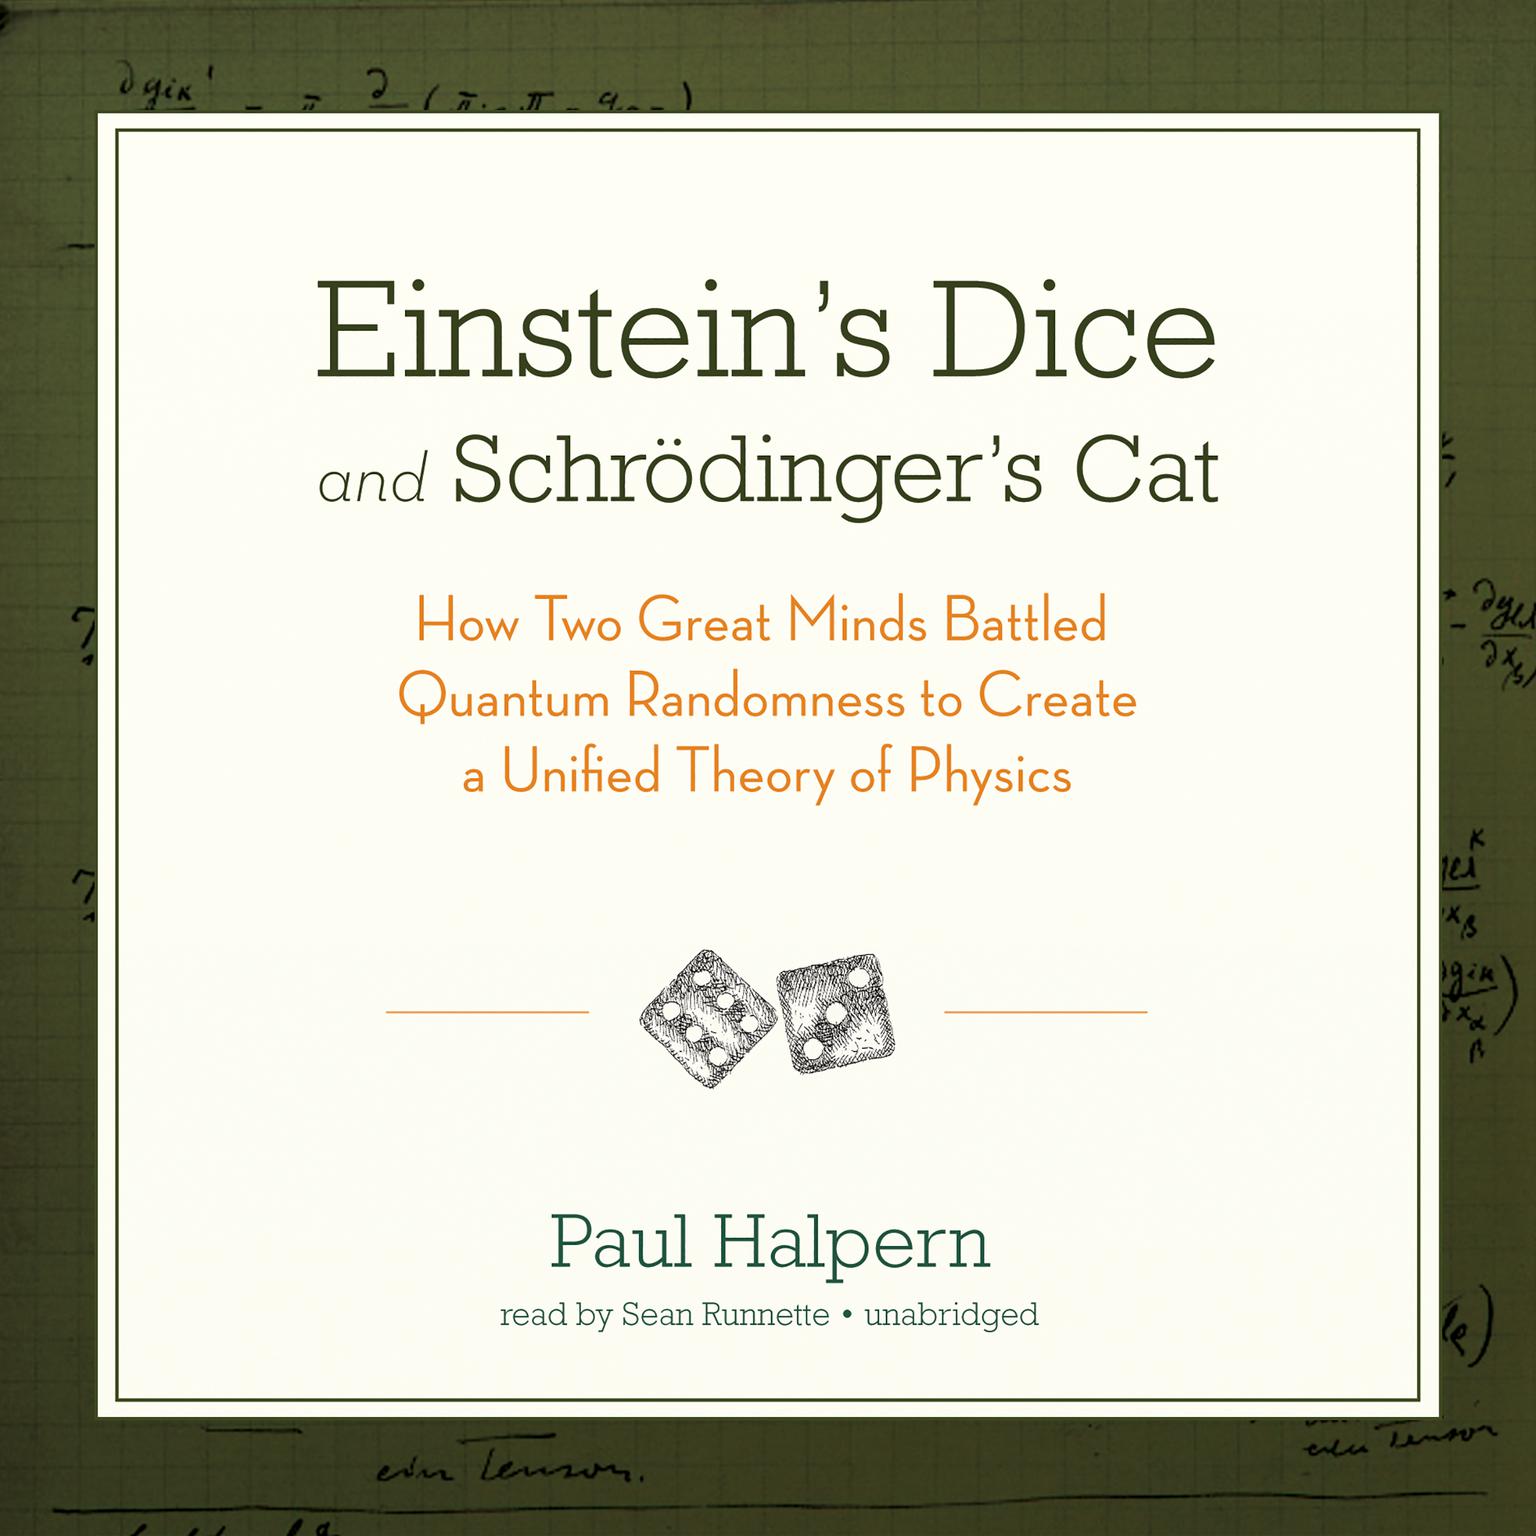 Einstein’s Dice and Schrödinger’s Cat: How Two Great Minds Battled Quantum Randomness to Create a Unified Theory of Physics Audiobook, by Paul Halpern